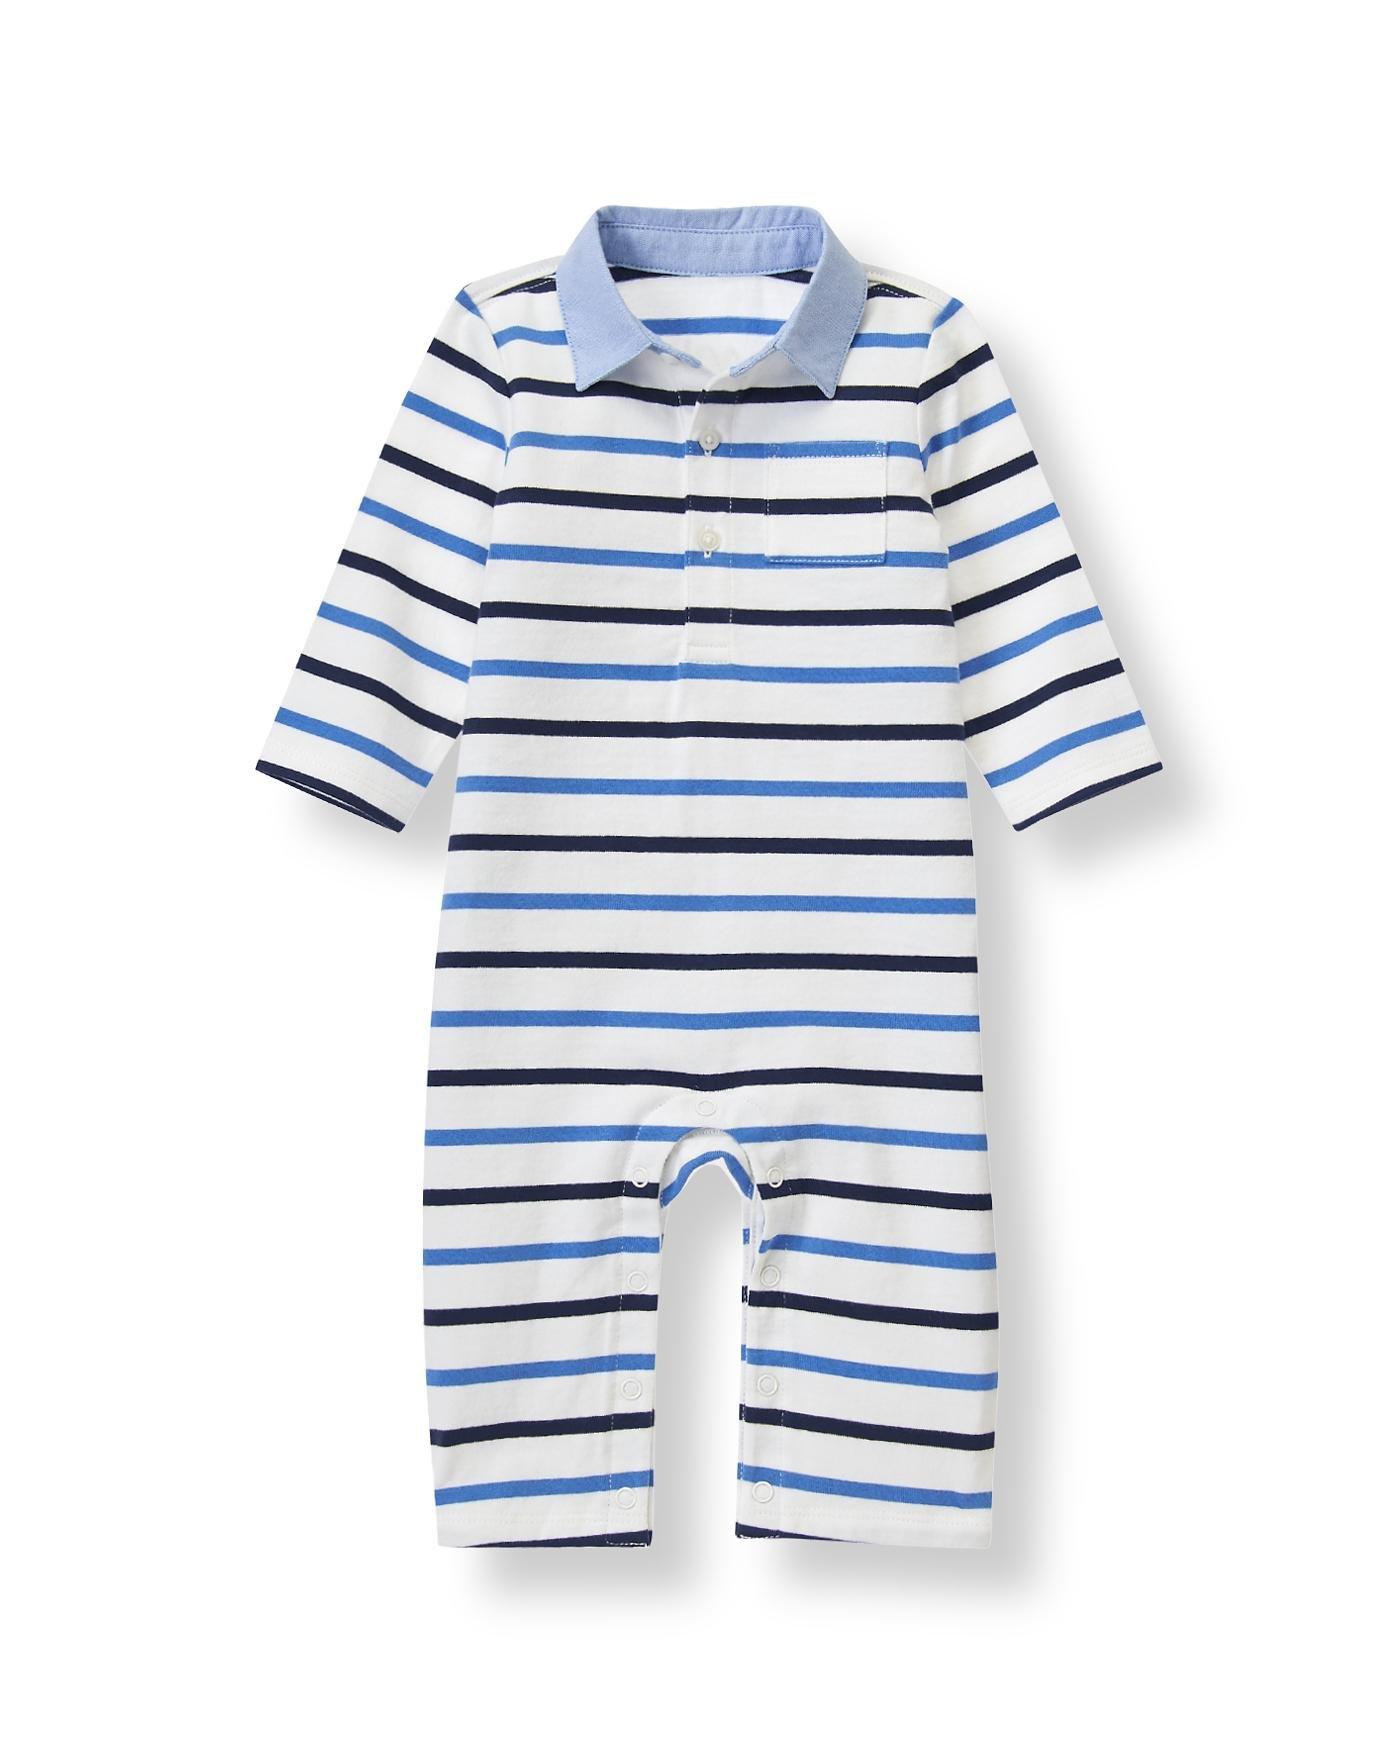 Striped Polo One-Piece image number 0